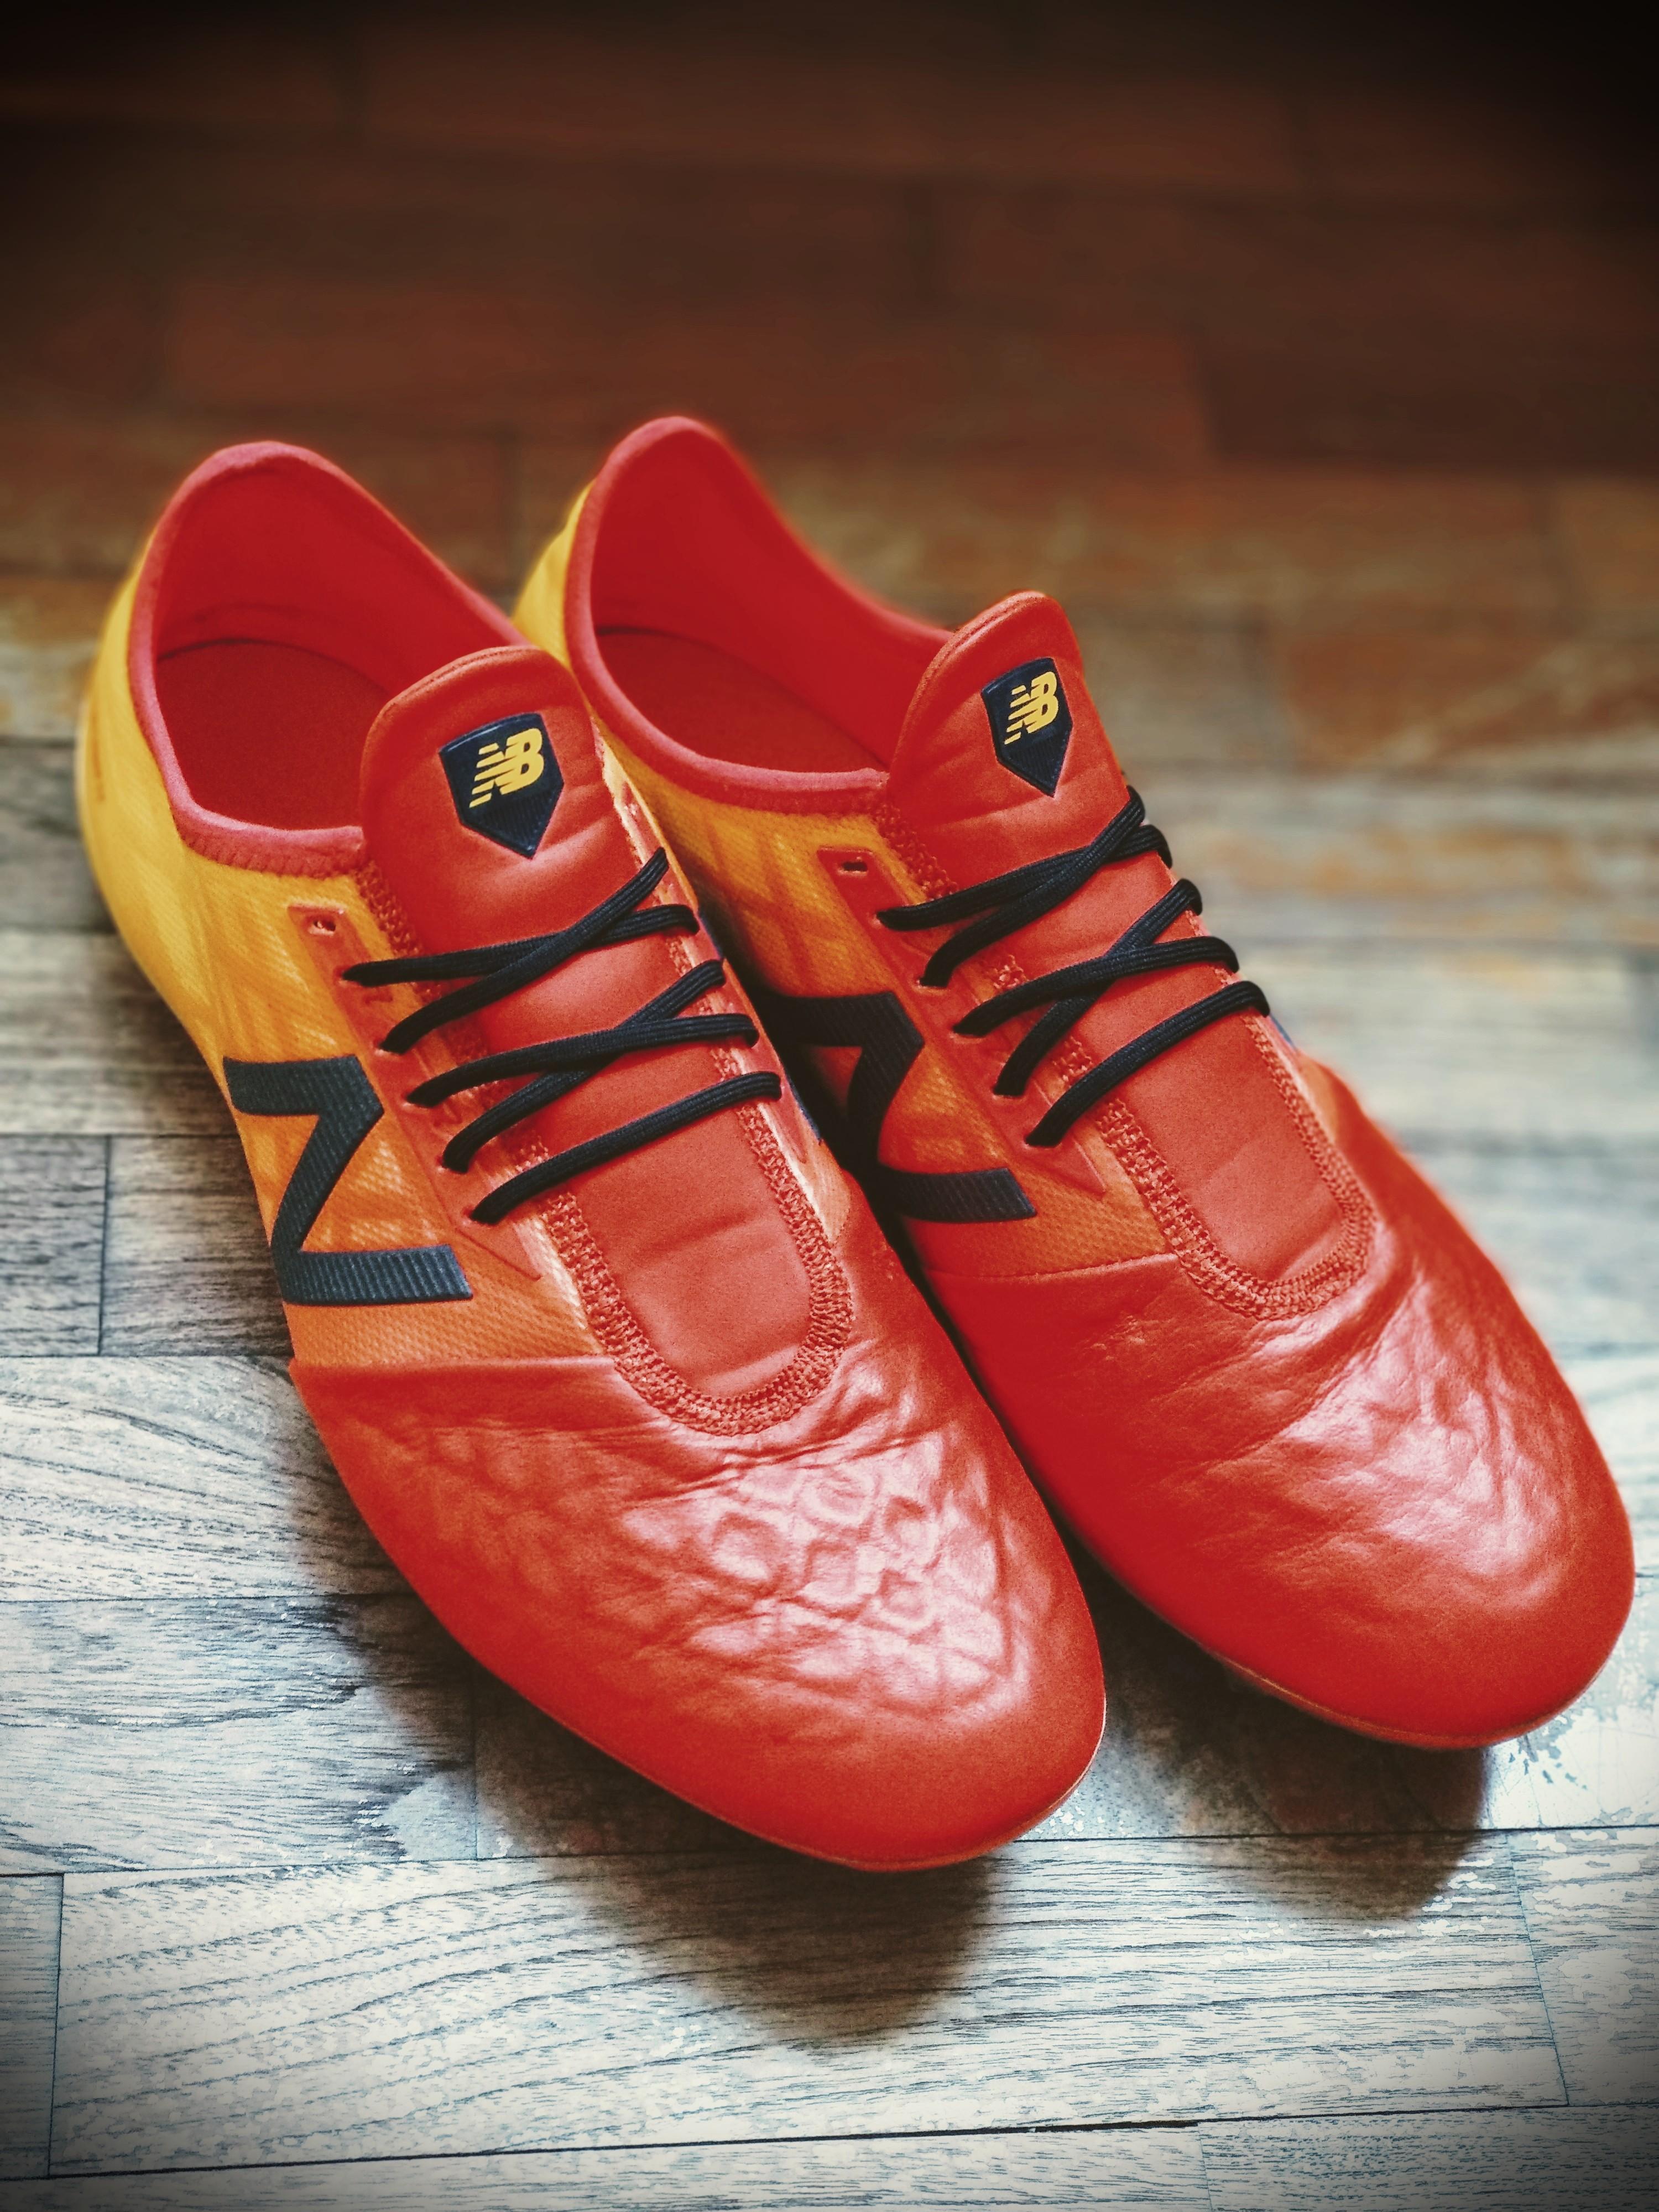 new balance furon 3. wide fit